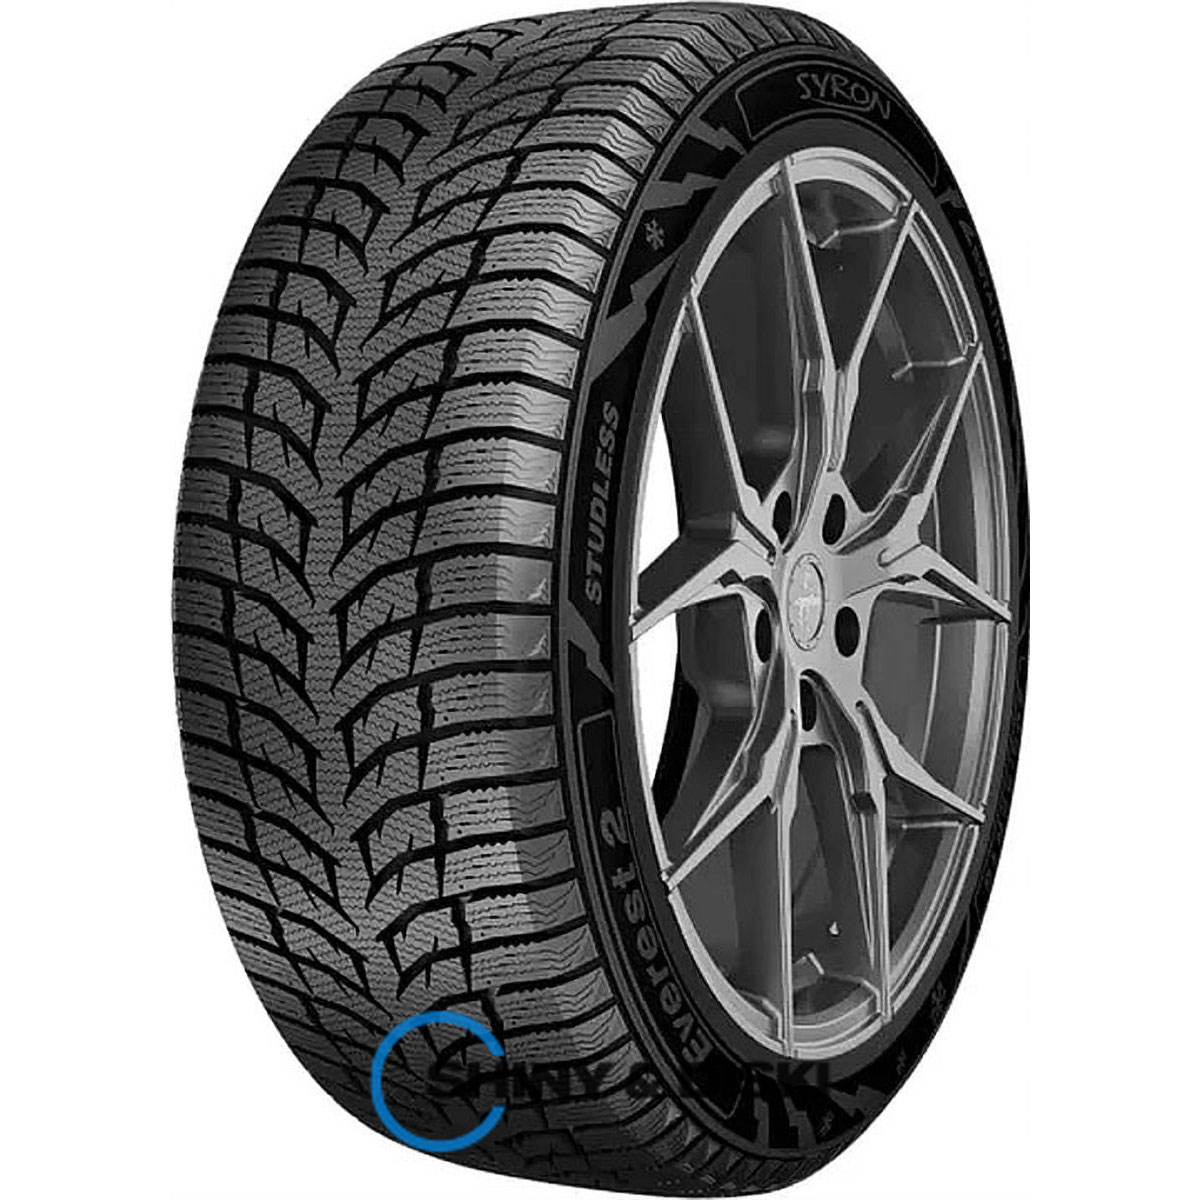 syron everest 2 185/65 r14 86t